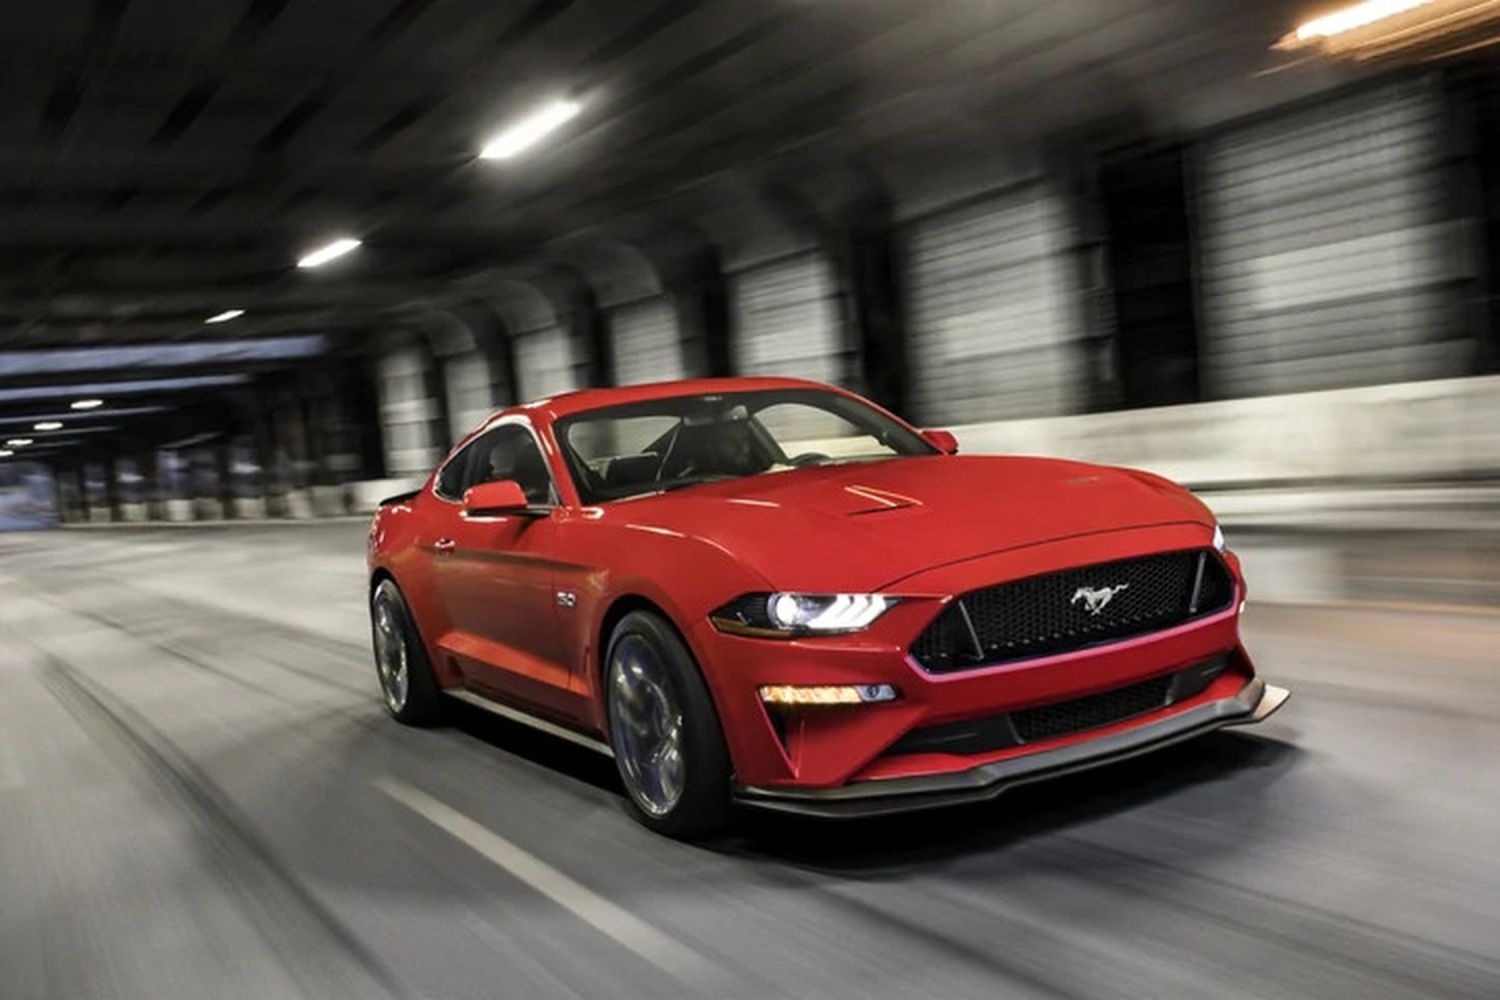 The 2021 Ford Mustang GT